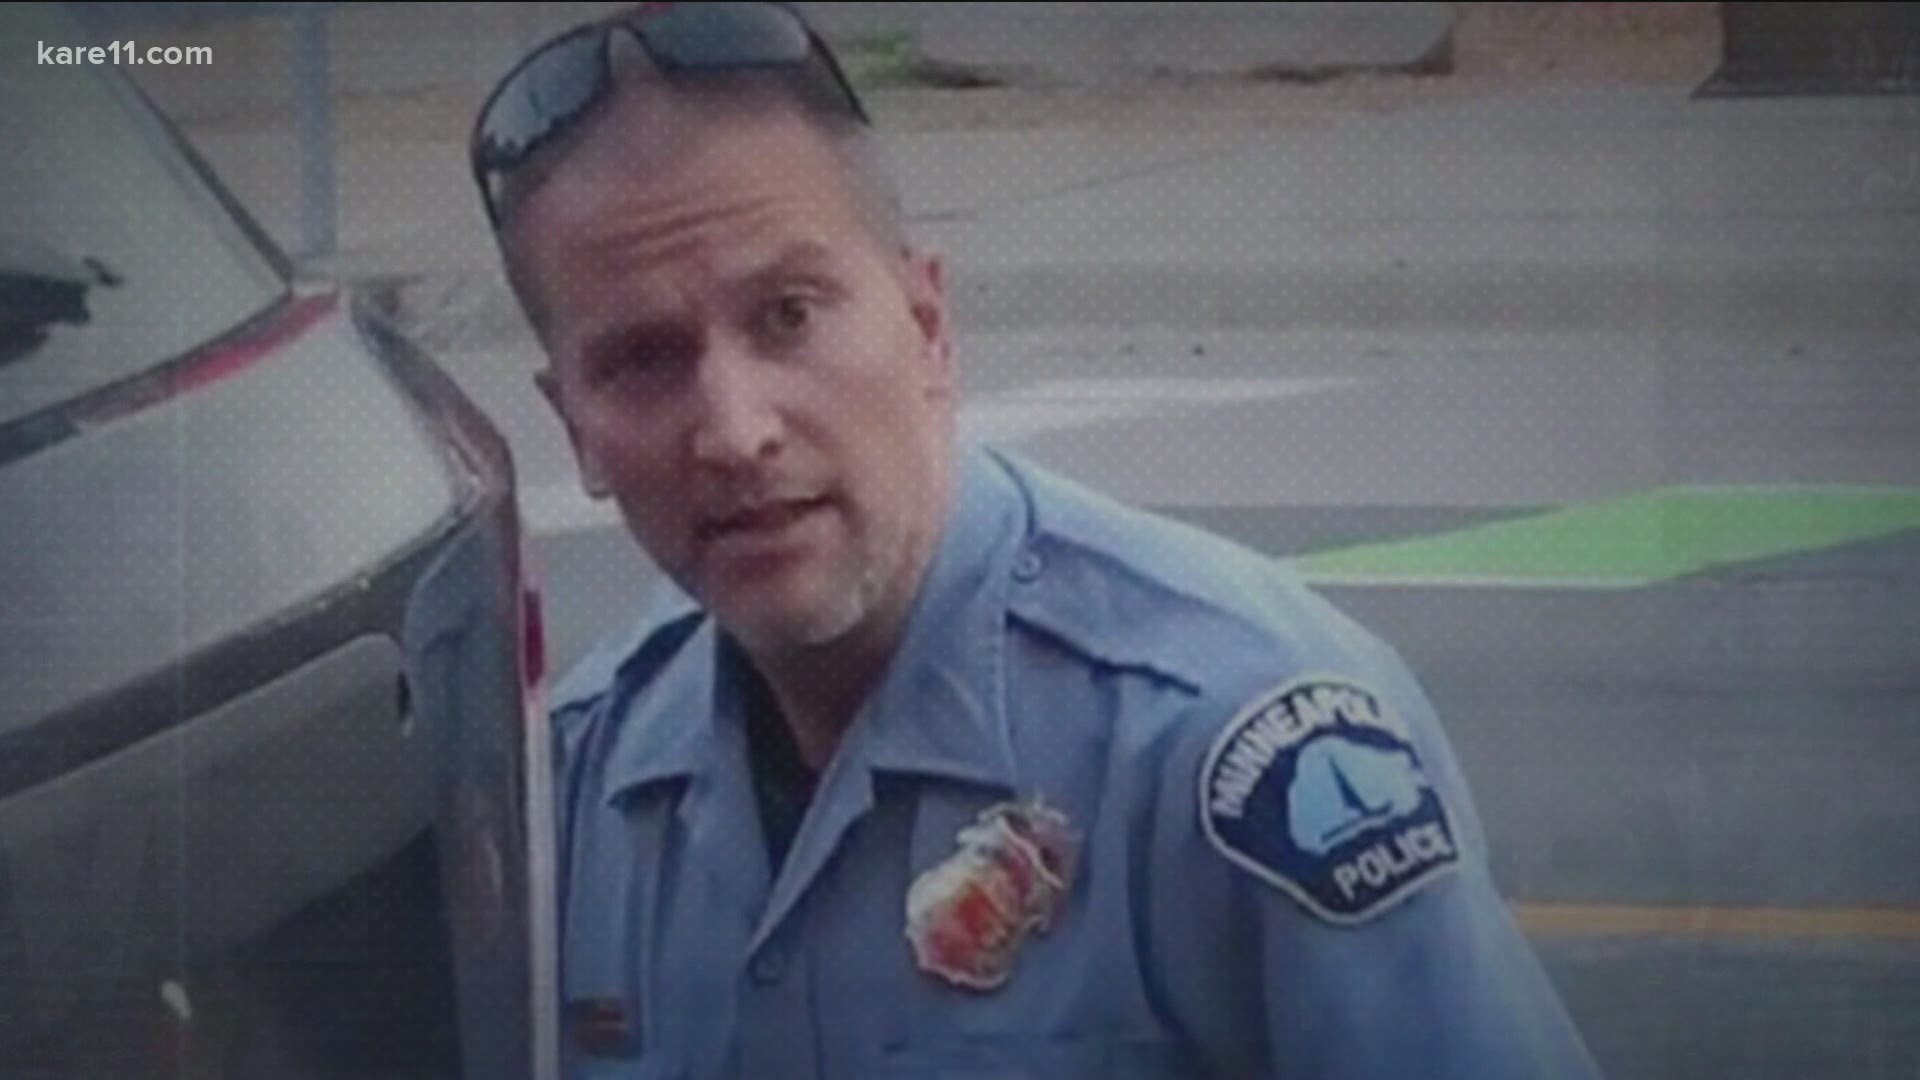 A ruling came down in the case against former Minneapolis police officer Derek Chauvin on Thursday.